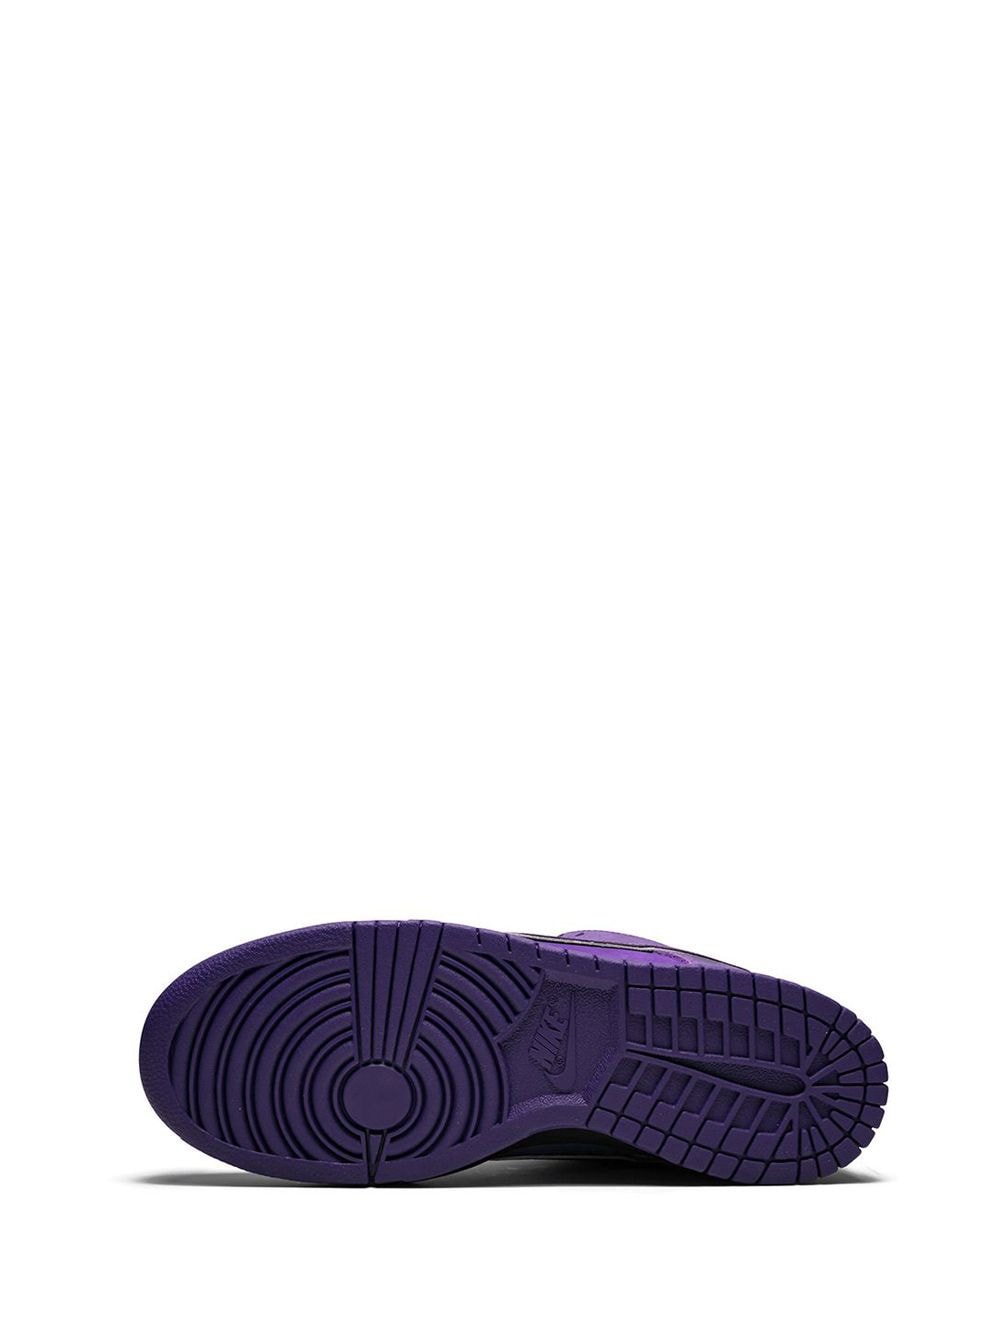 Nike DUNK CONCEPTS PURPLE LOPSTER